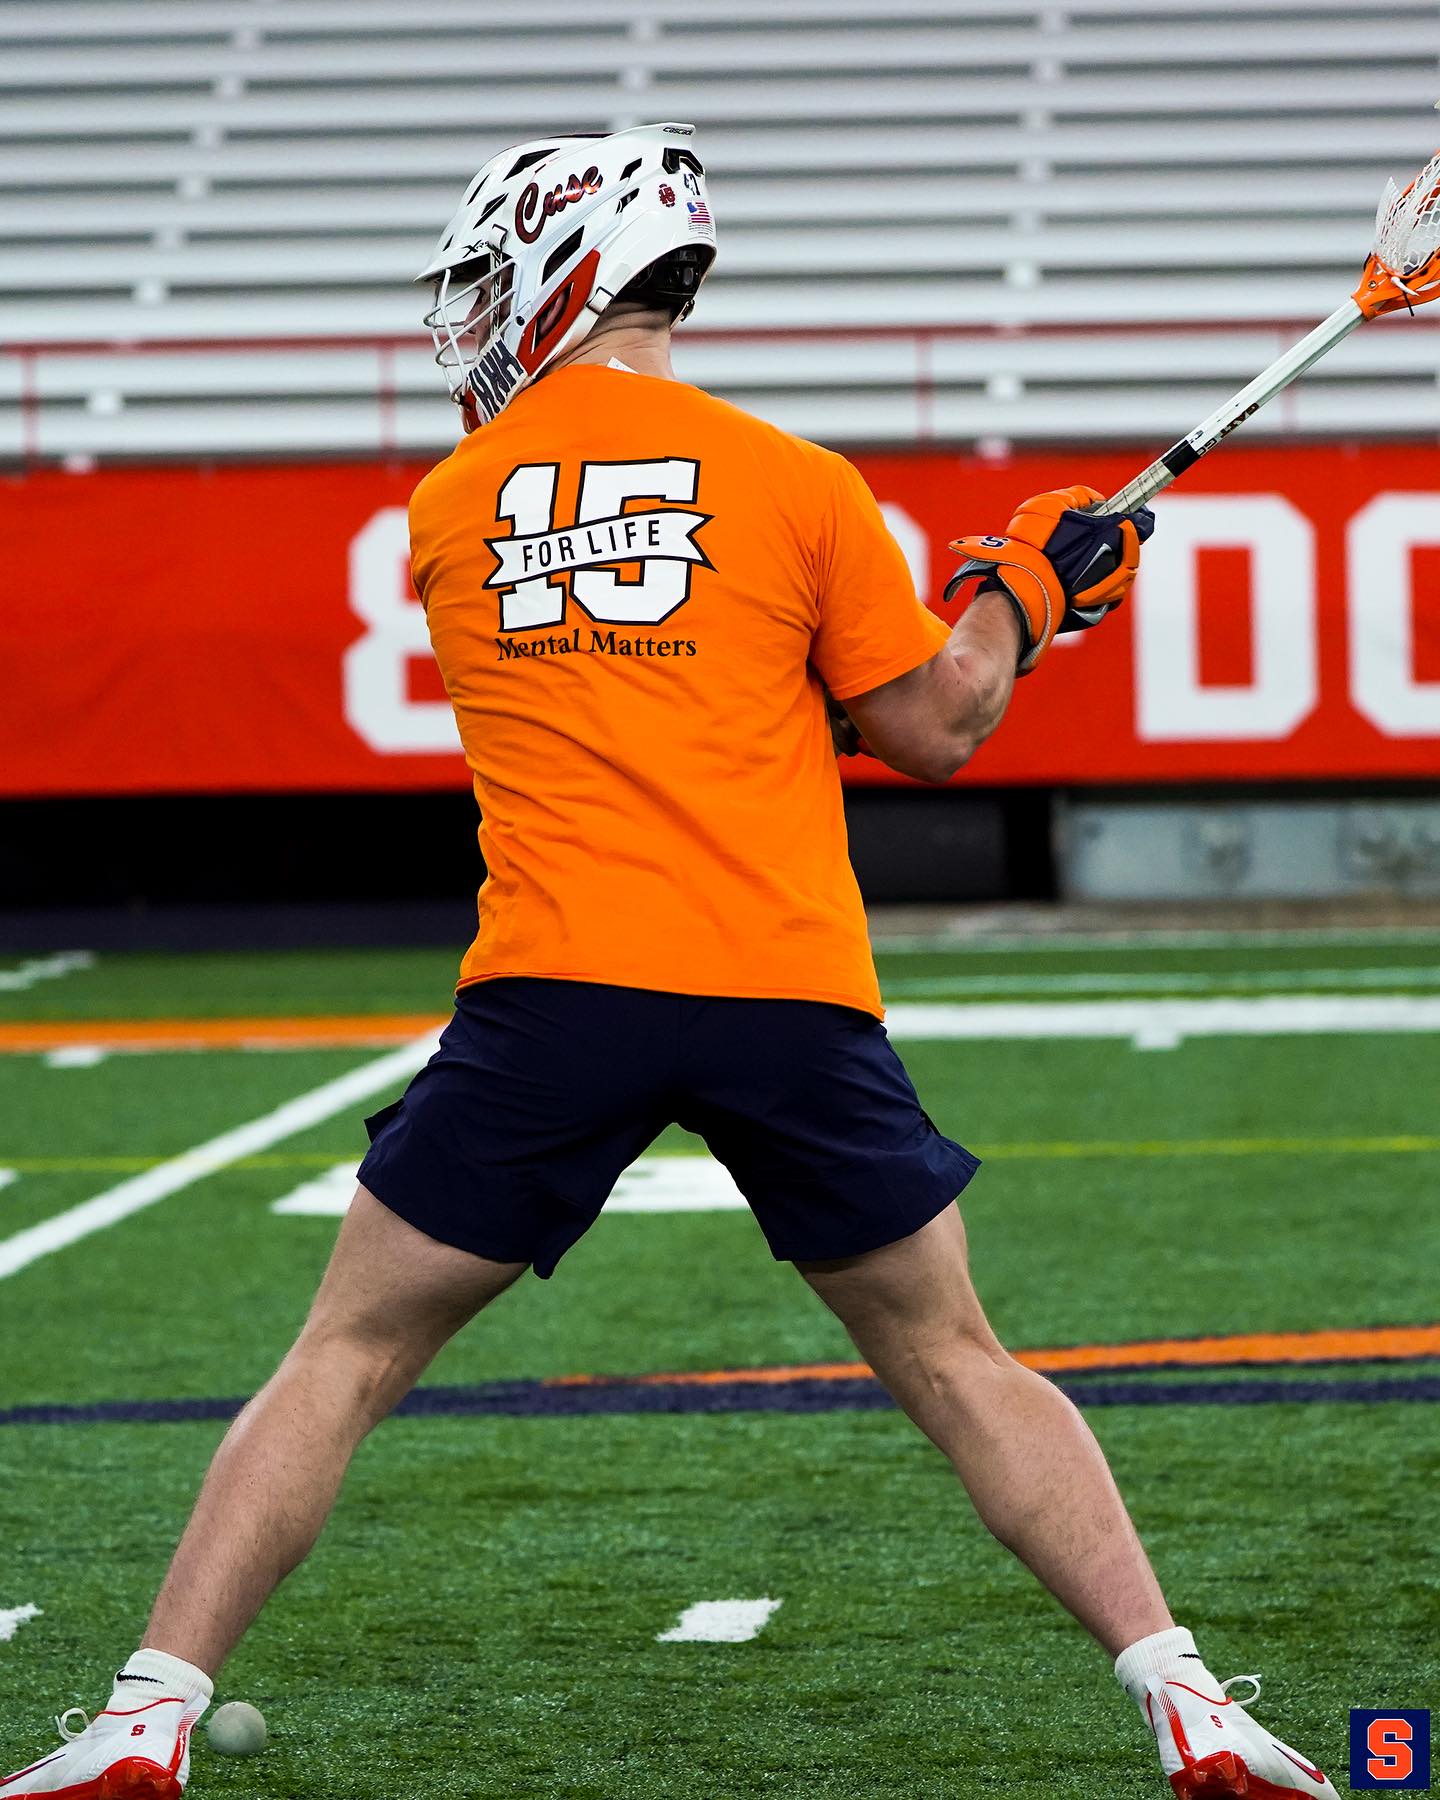 Men's lacrosse player getting ready to shoot the ball. 